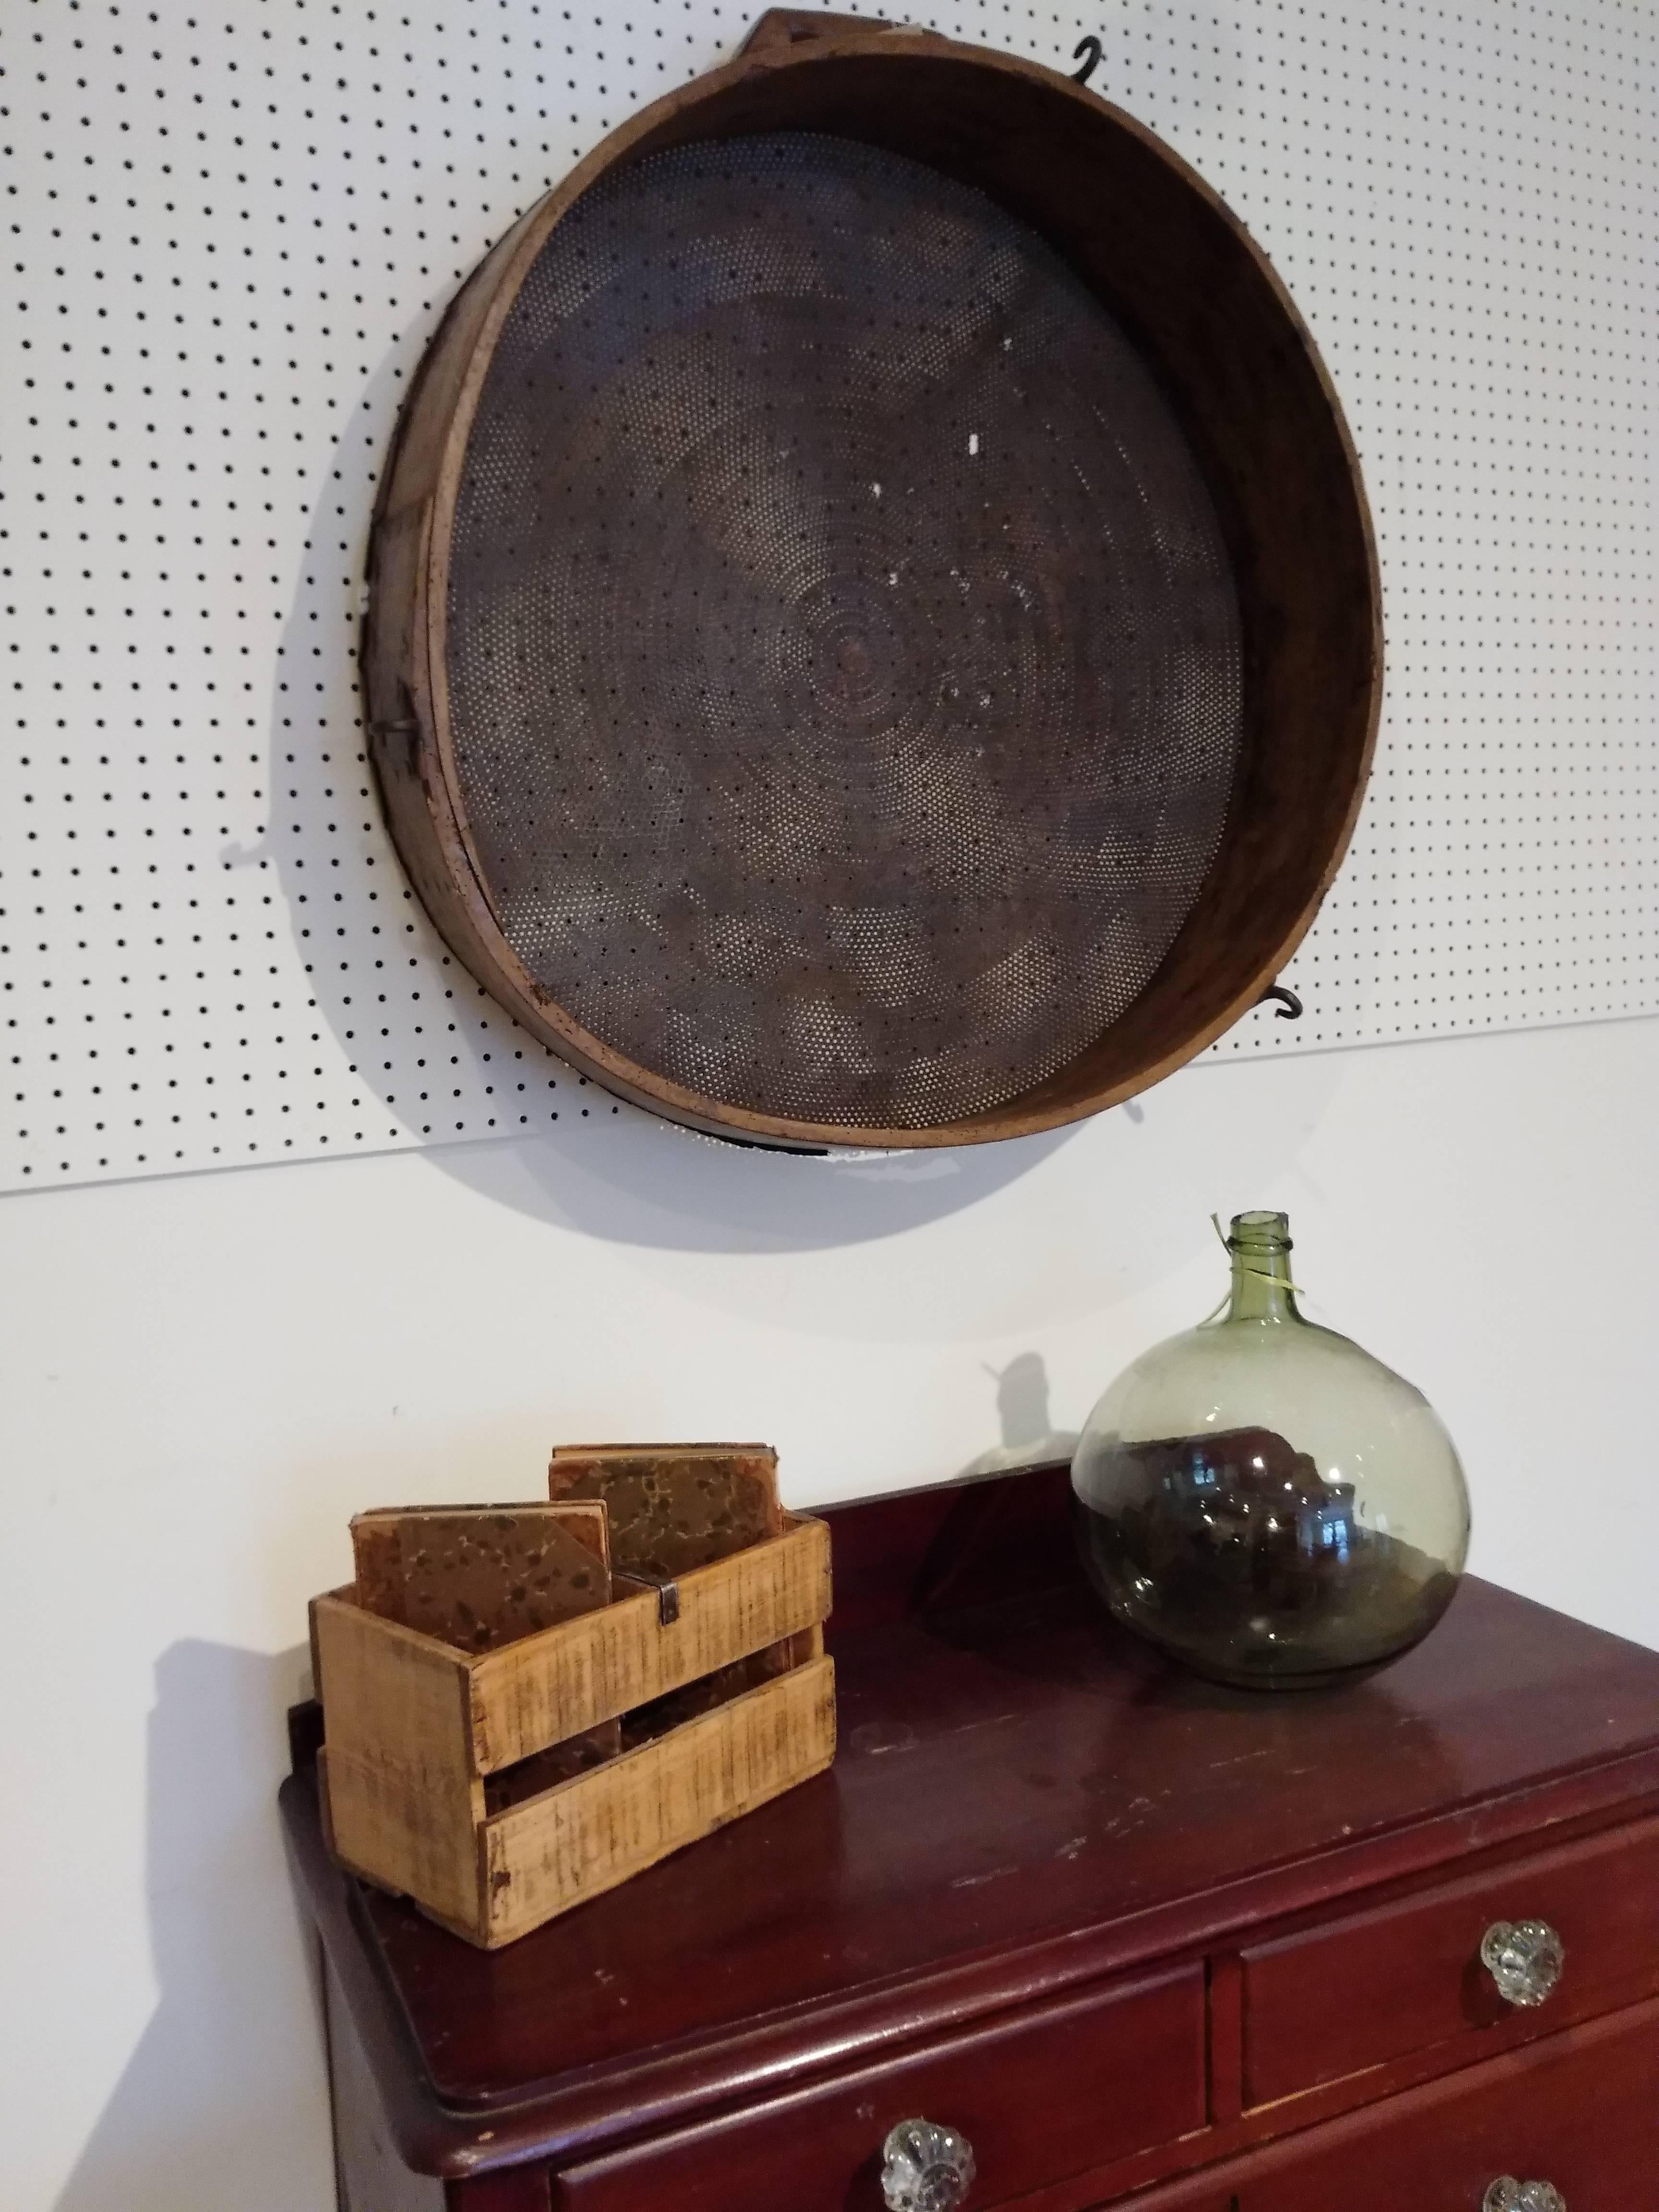 If you are looking for a large piece to hang on the walls of your country home your ship has arrived. The rim is wood and a bit warped with age and the middle is metal. It dates from 1870. There is a handle on top of the piece and we love this piece